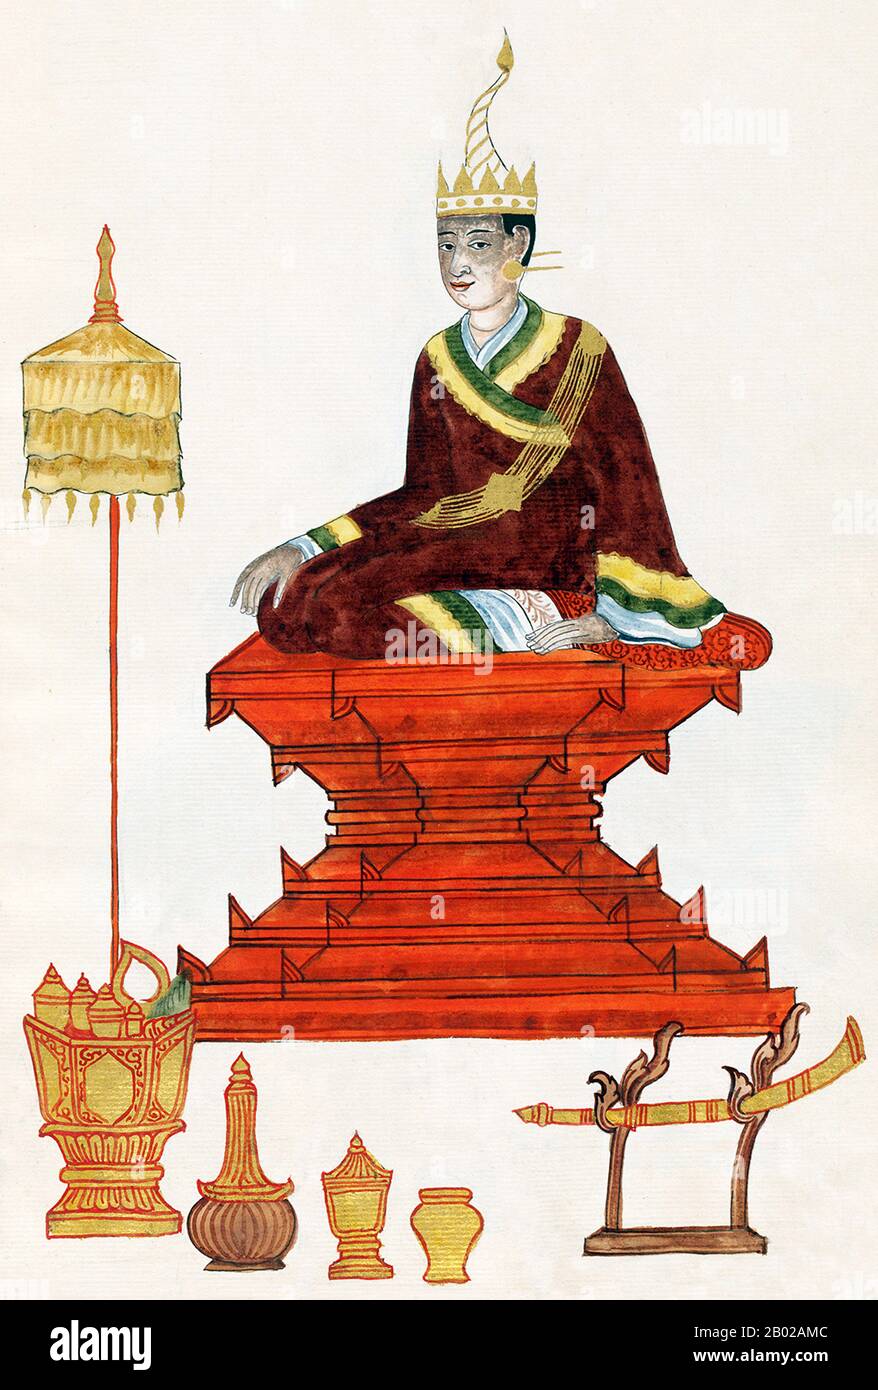 The Konbaung Dynasty was the last dynasty that ruled Burma (Myanmar), from 1752 to 1885. The dynasty created the second largest empire in Burmese history, and continued the administrative reforms begun by the Toungoo dynasty, laying the foundations of modern state of Burma.  The reforms proved insufficient to stem the advance of the British, who defeated the Burmese in all three Anglo-Burmese wars over a six-decade span (1824–1885) and ended the millennium-old Burmese monarchy in 1885. Stock Photo